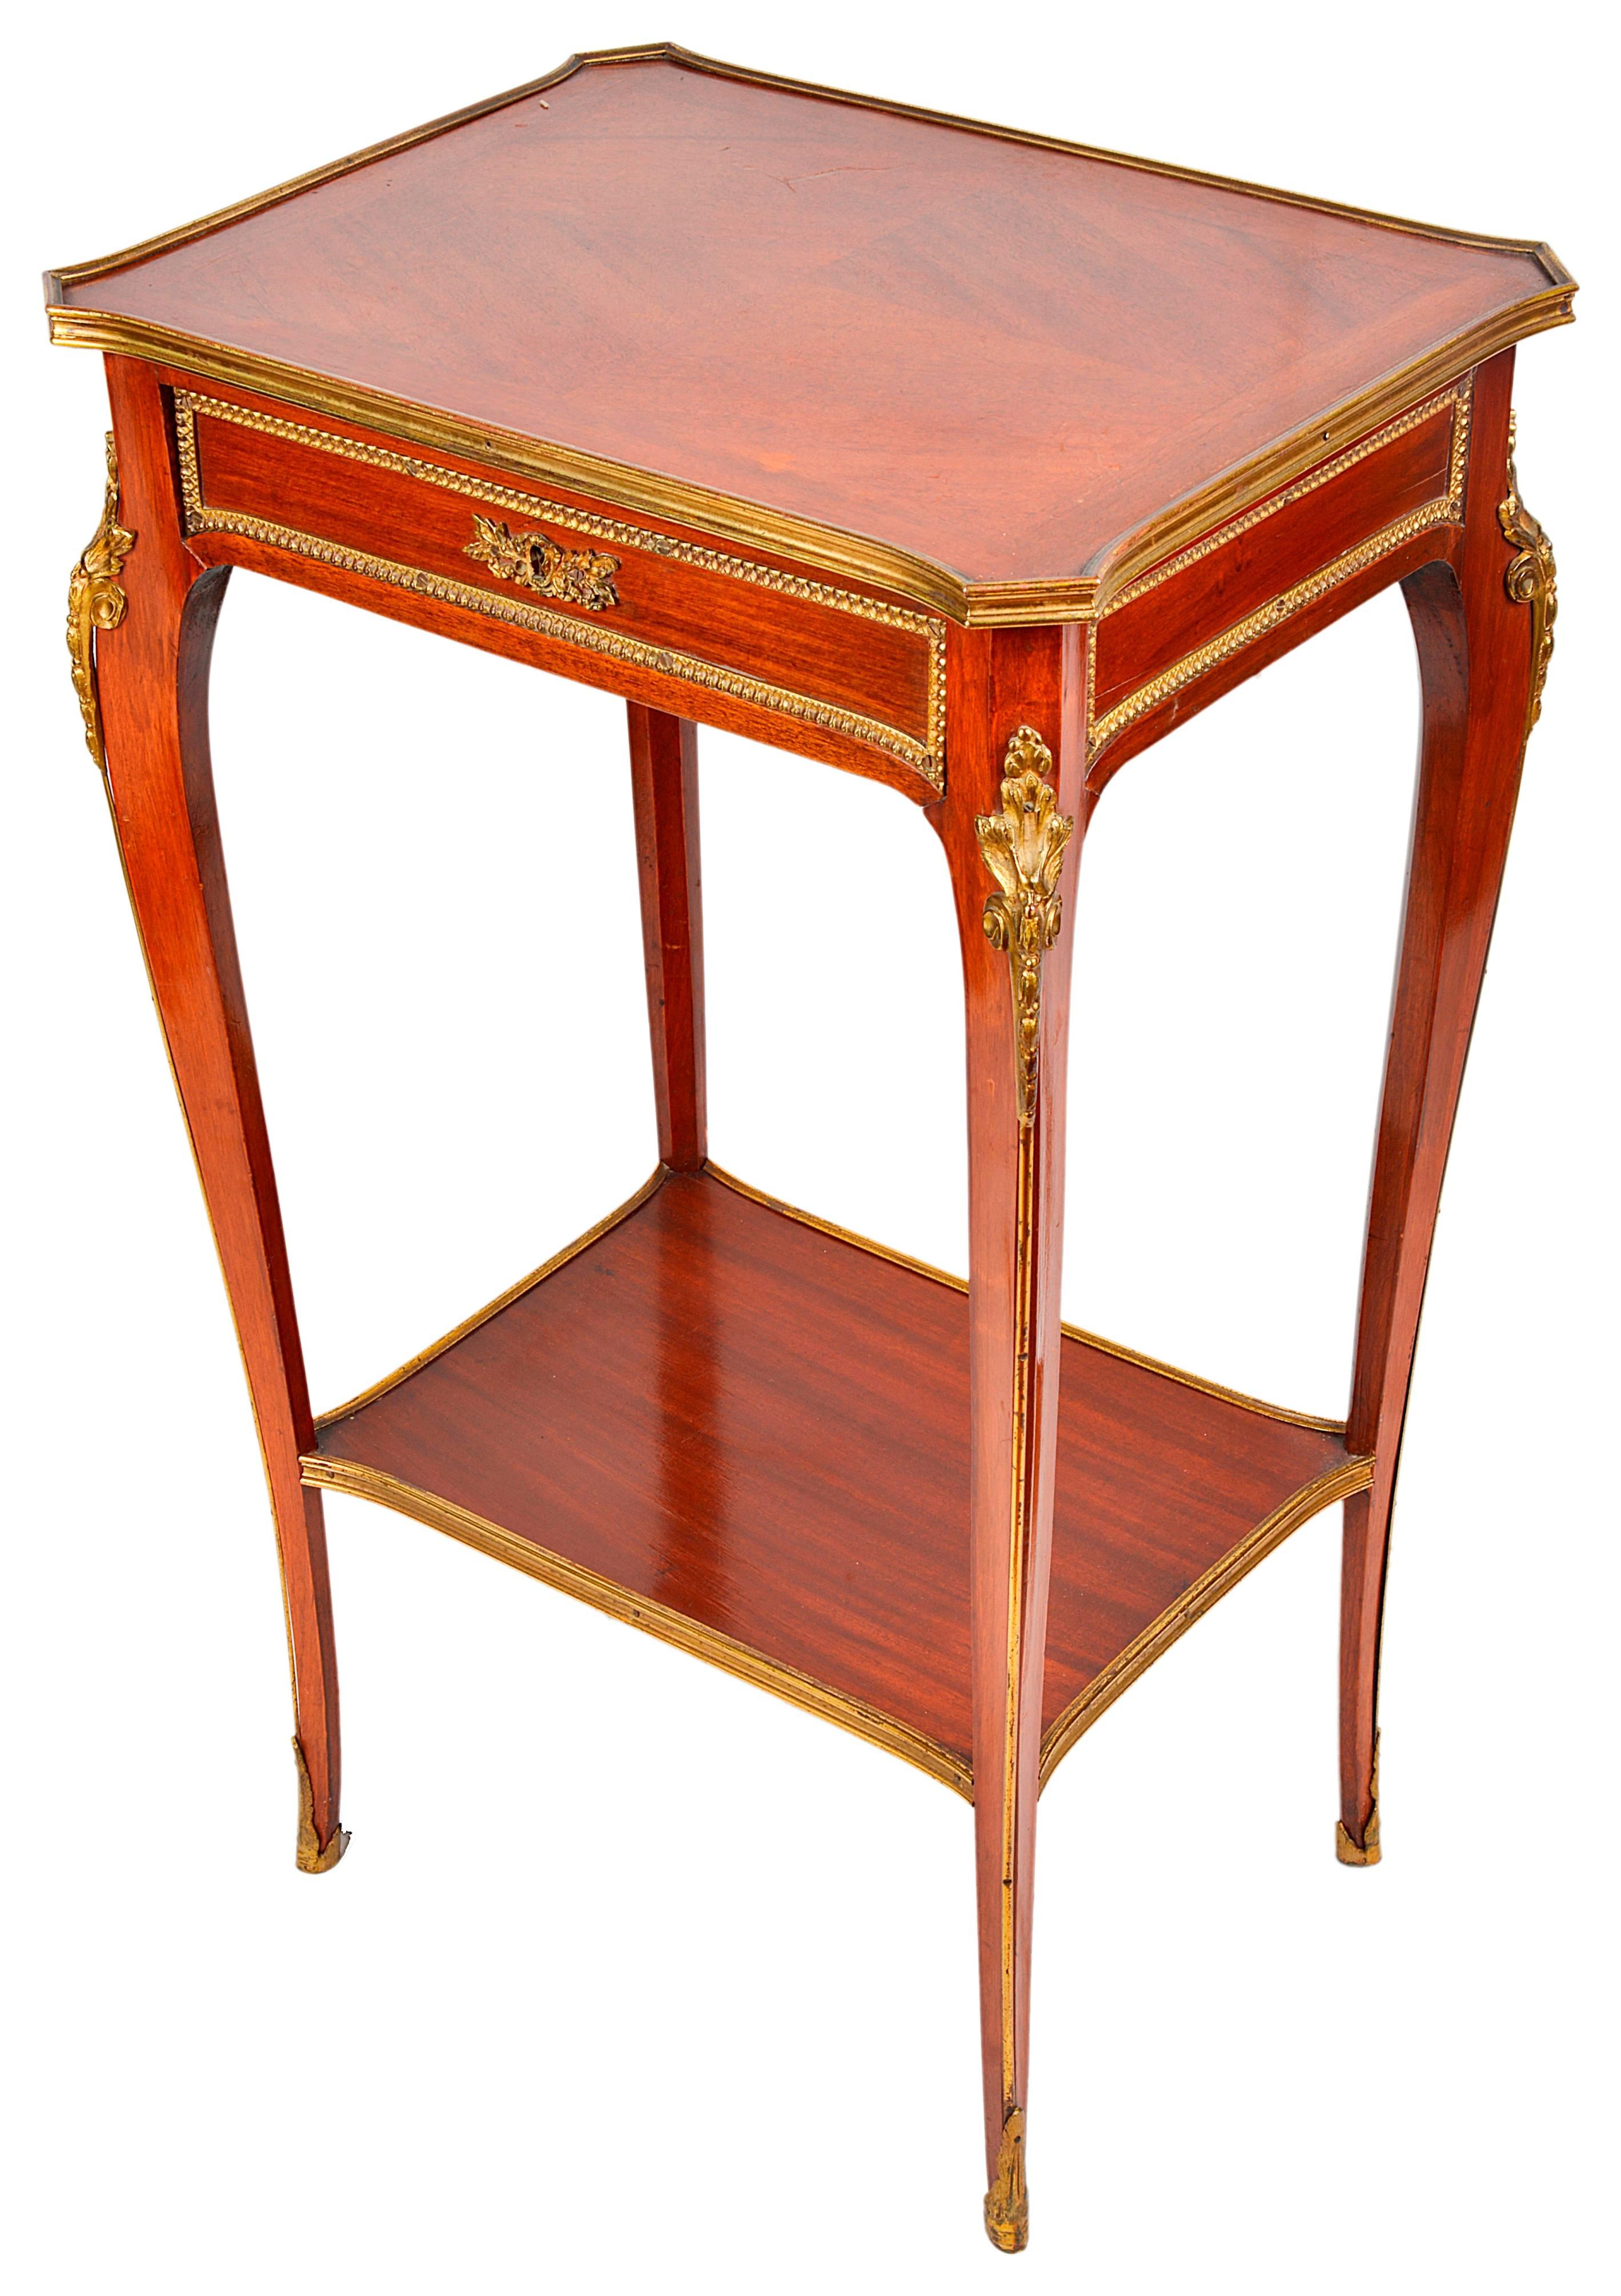 Gilt Pair of French Louis XVI Style Mahogany Side Tables